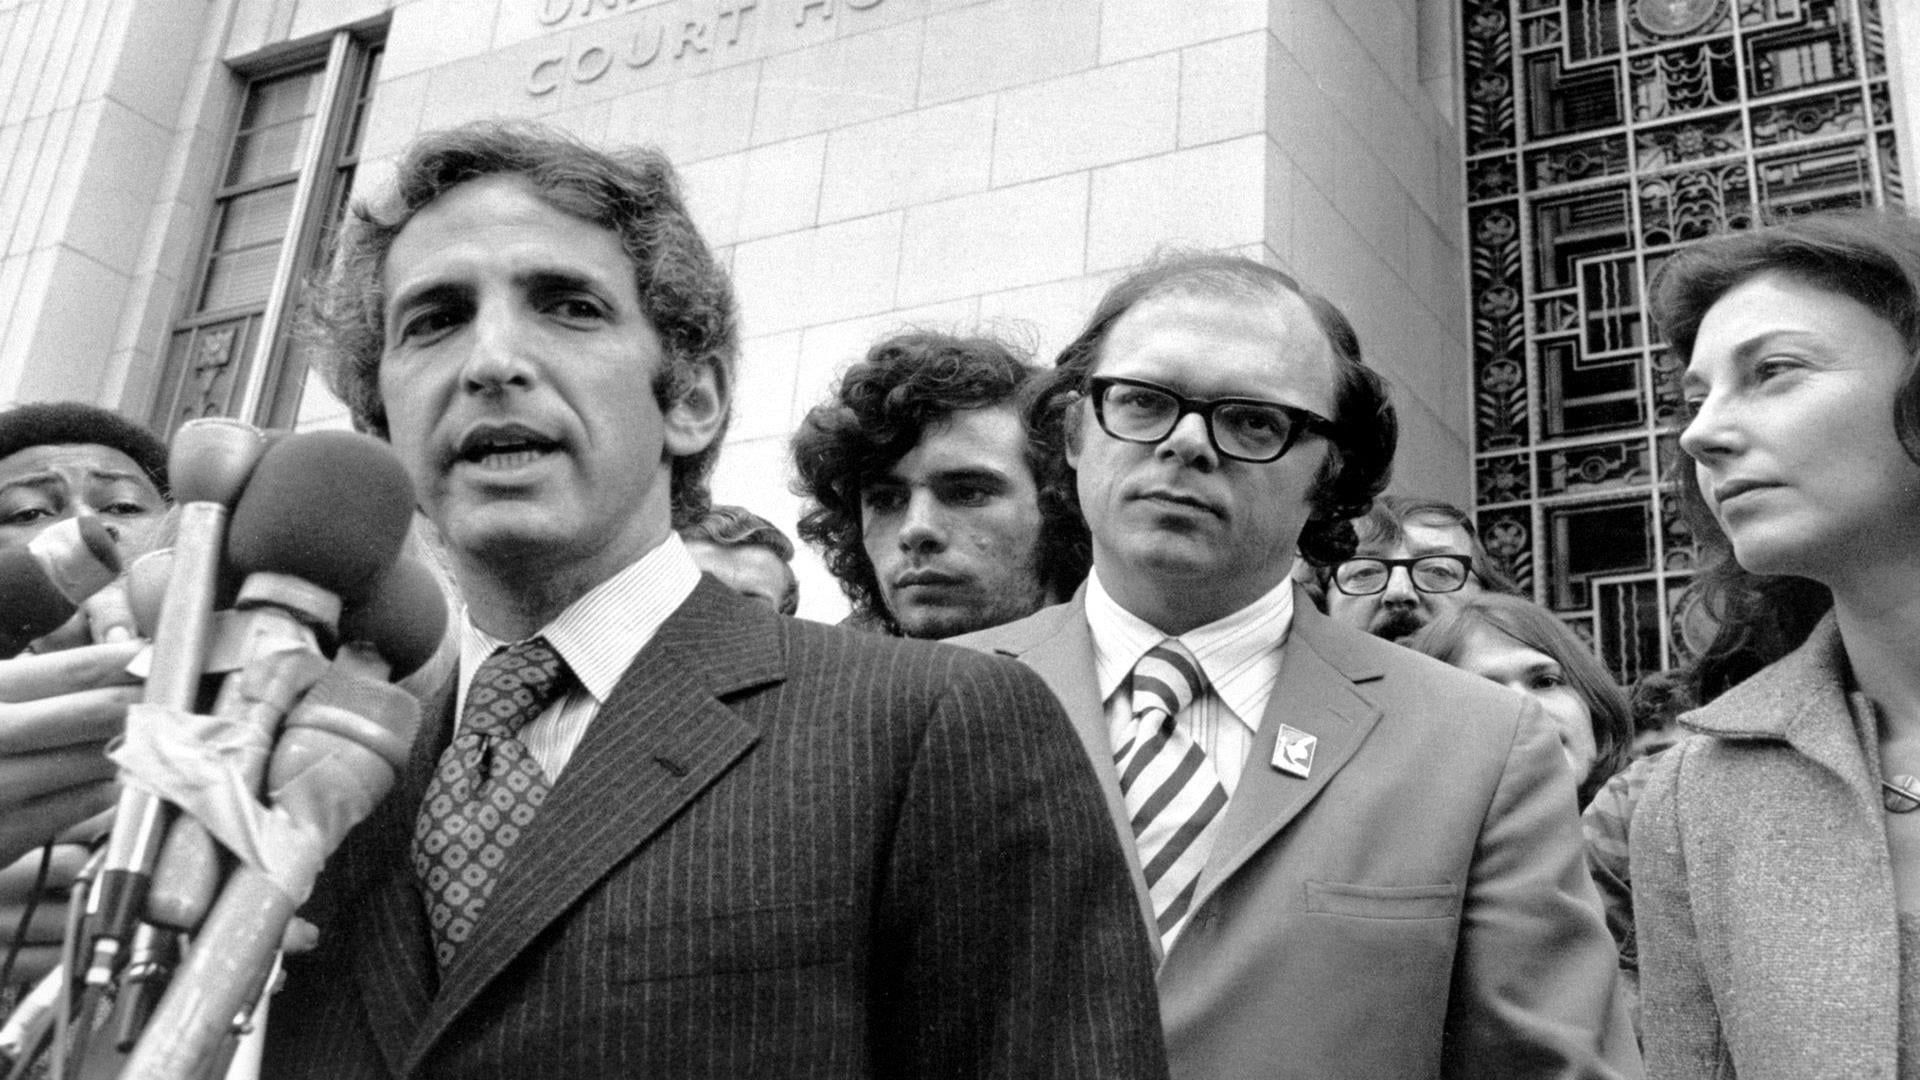 The Most Dangerous Man in America: Daniel Ellsberg and the Pentagon Papers background